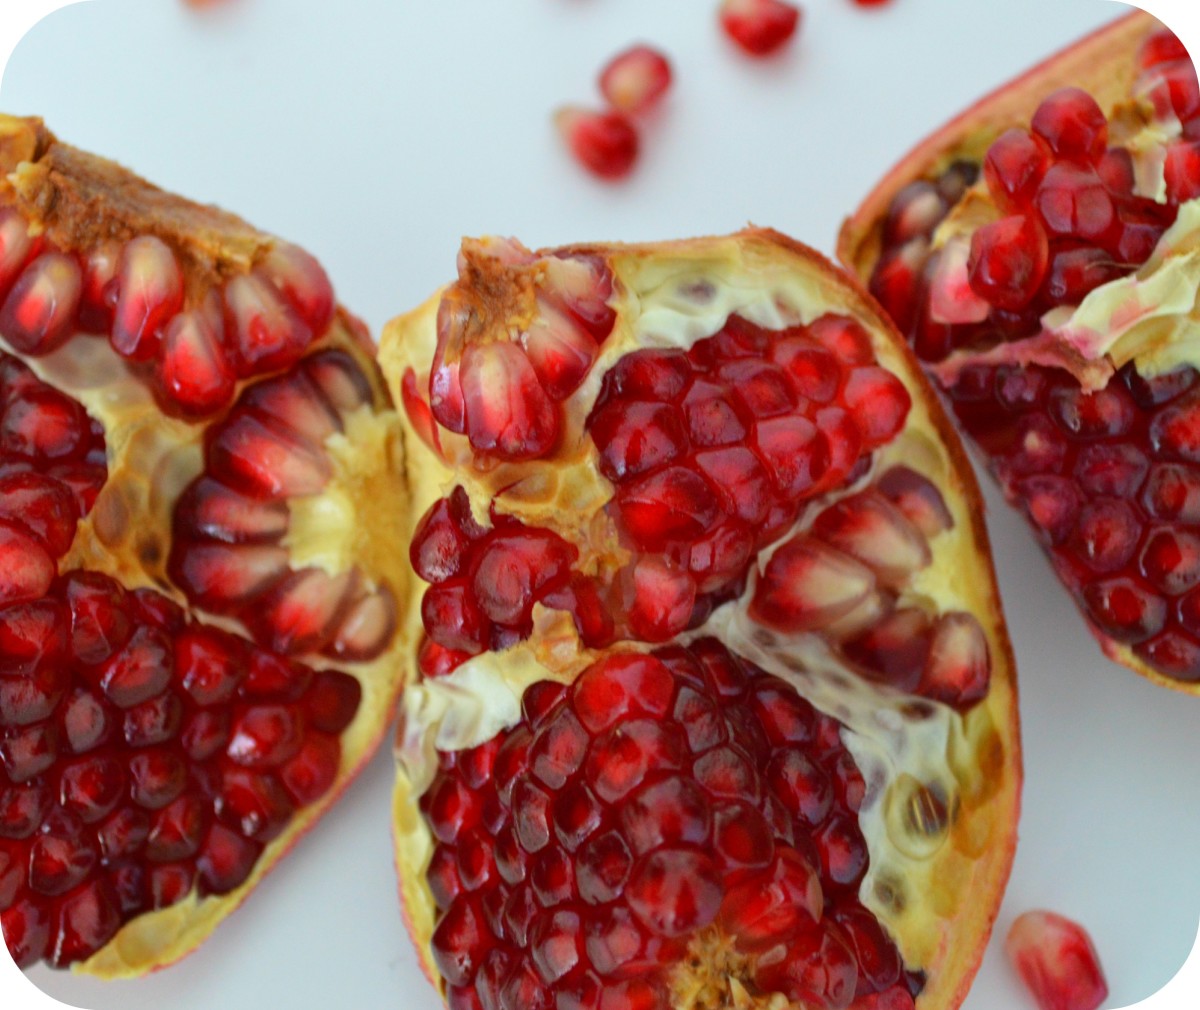 Pomegranates, with their ruby-like arils, are superfoods hailed for their rich antioxidant and trace mineral content. These fruits can do wonders for tired, dull or aging skin.